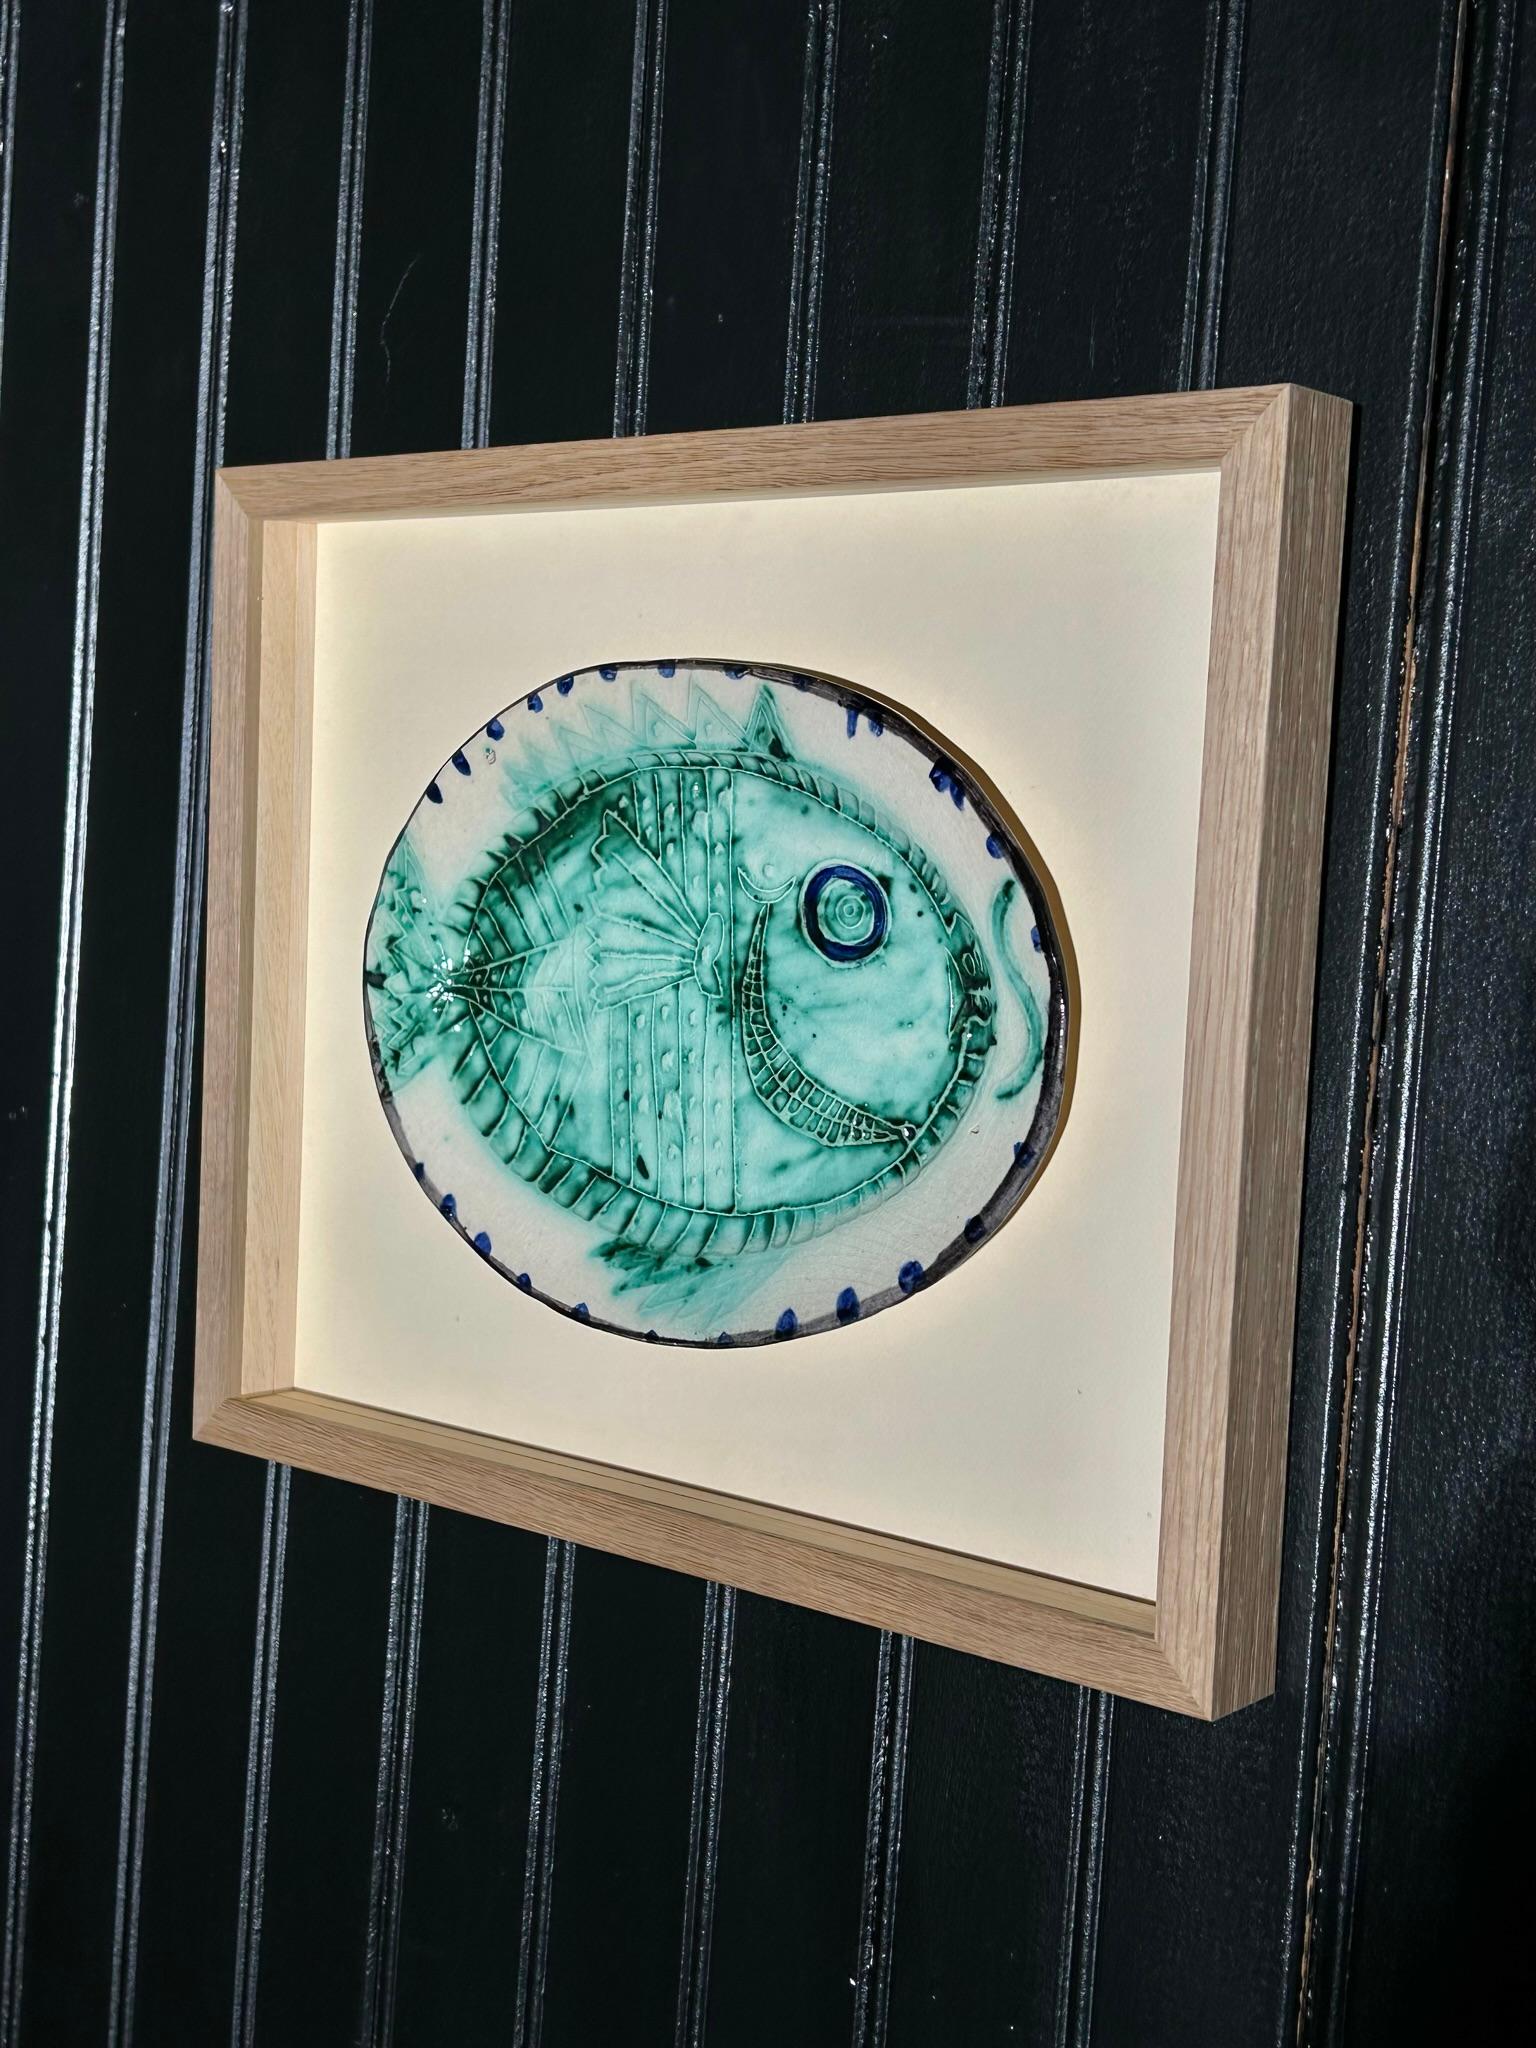 Pablo Picasso Rare fish in profile (AR 130) Oval platter Width 25.5 cm Length 33.5 cm Edition of 50 but unique color. framed